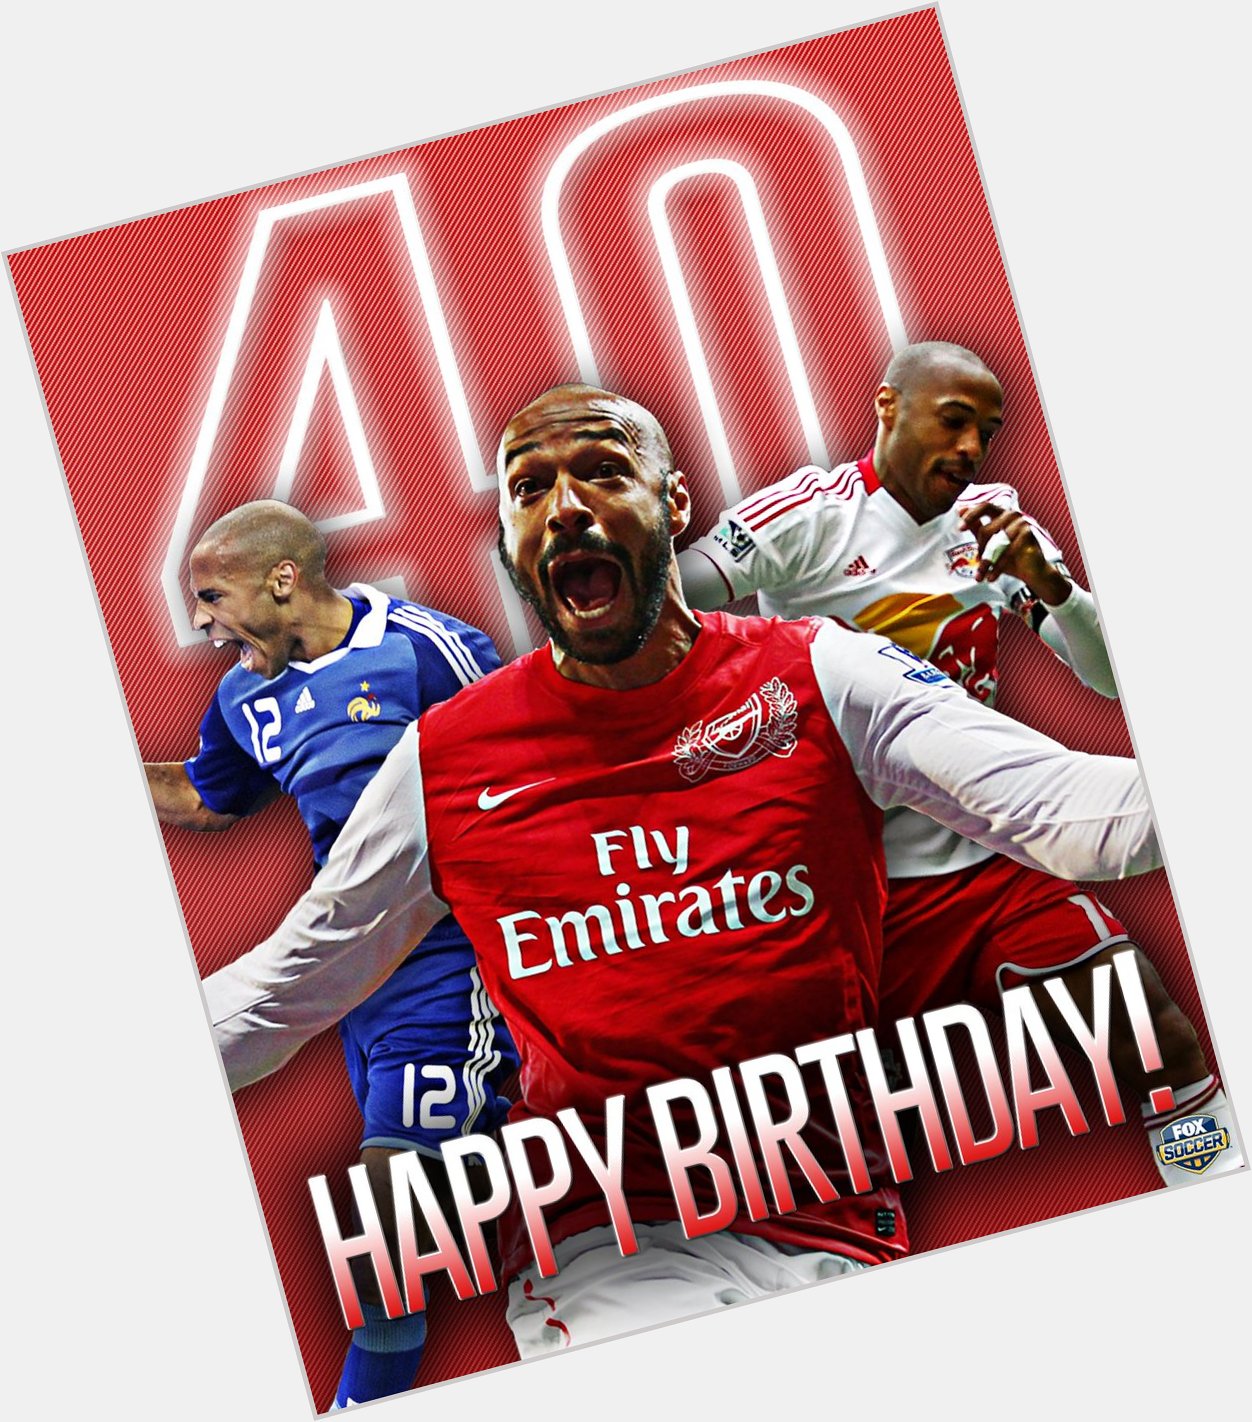 Happy 40th birthday to Thierry Henry, Arsenal\s and the French national team\s all-time top scorer.

What a legend. 